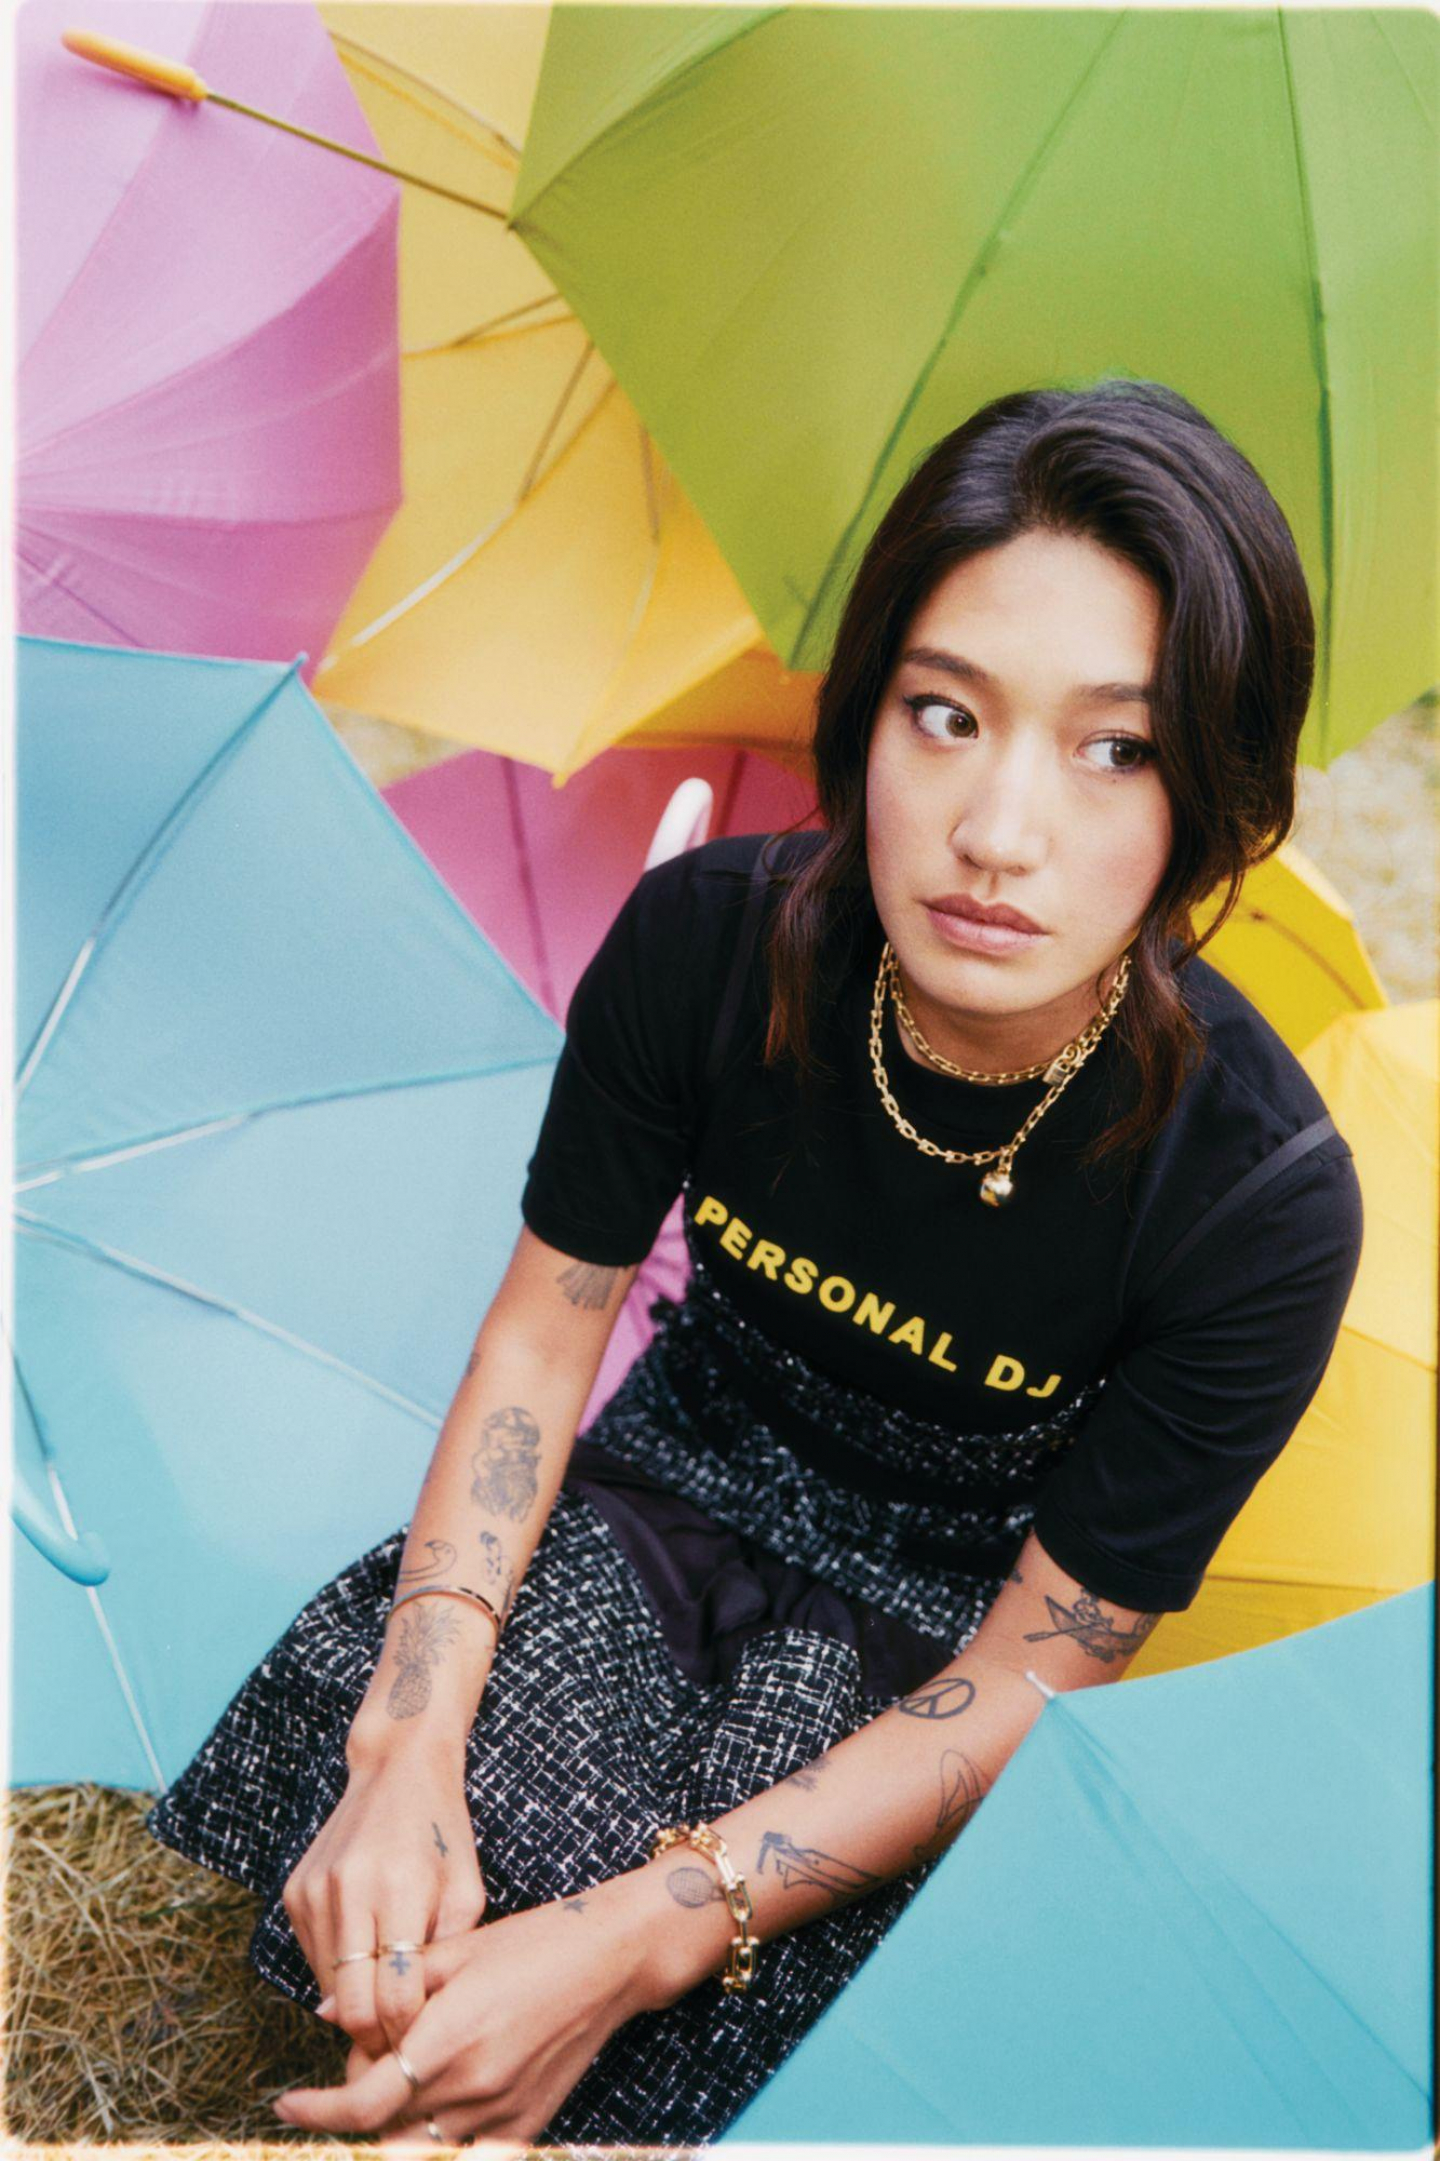 Peggy Gou appears on the cover of this month's Harper's Bazaar